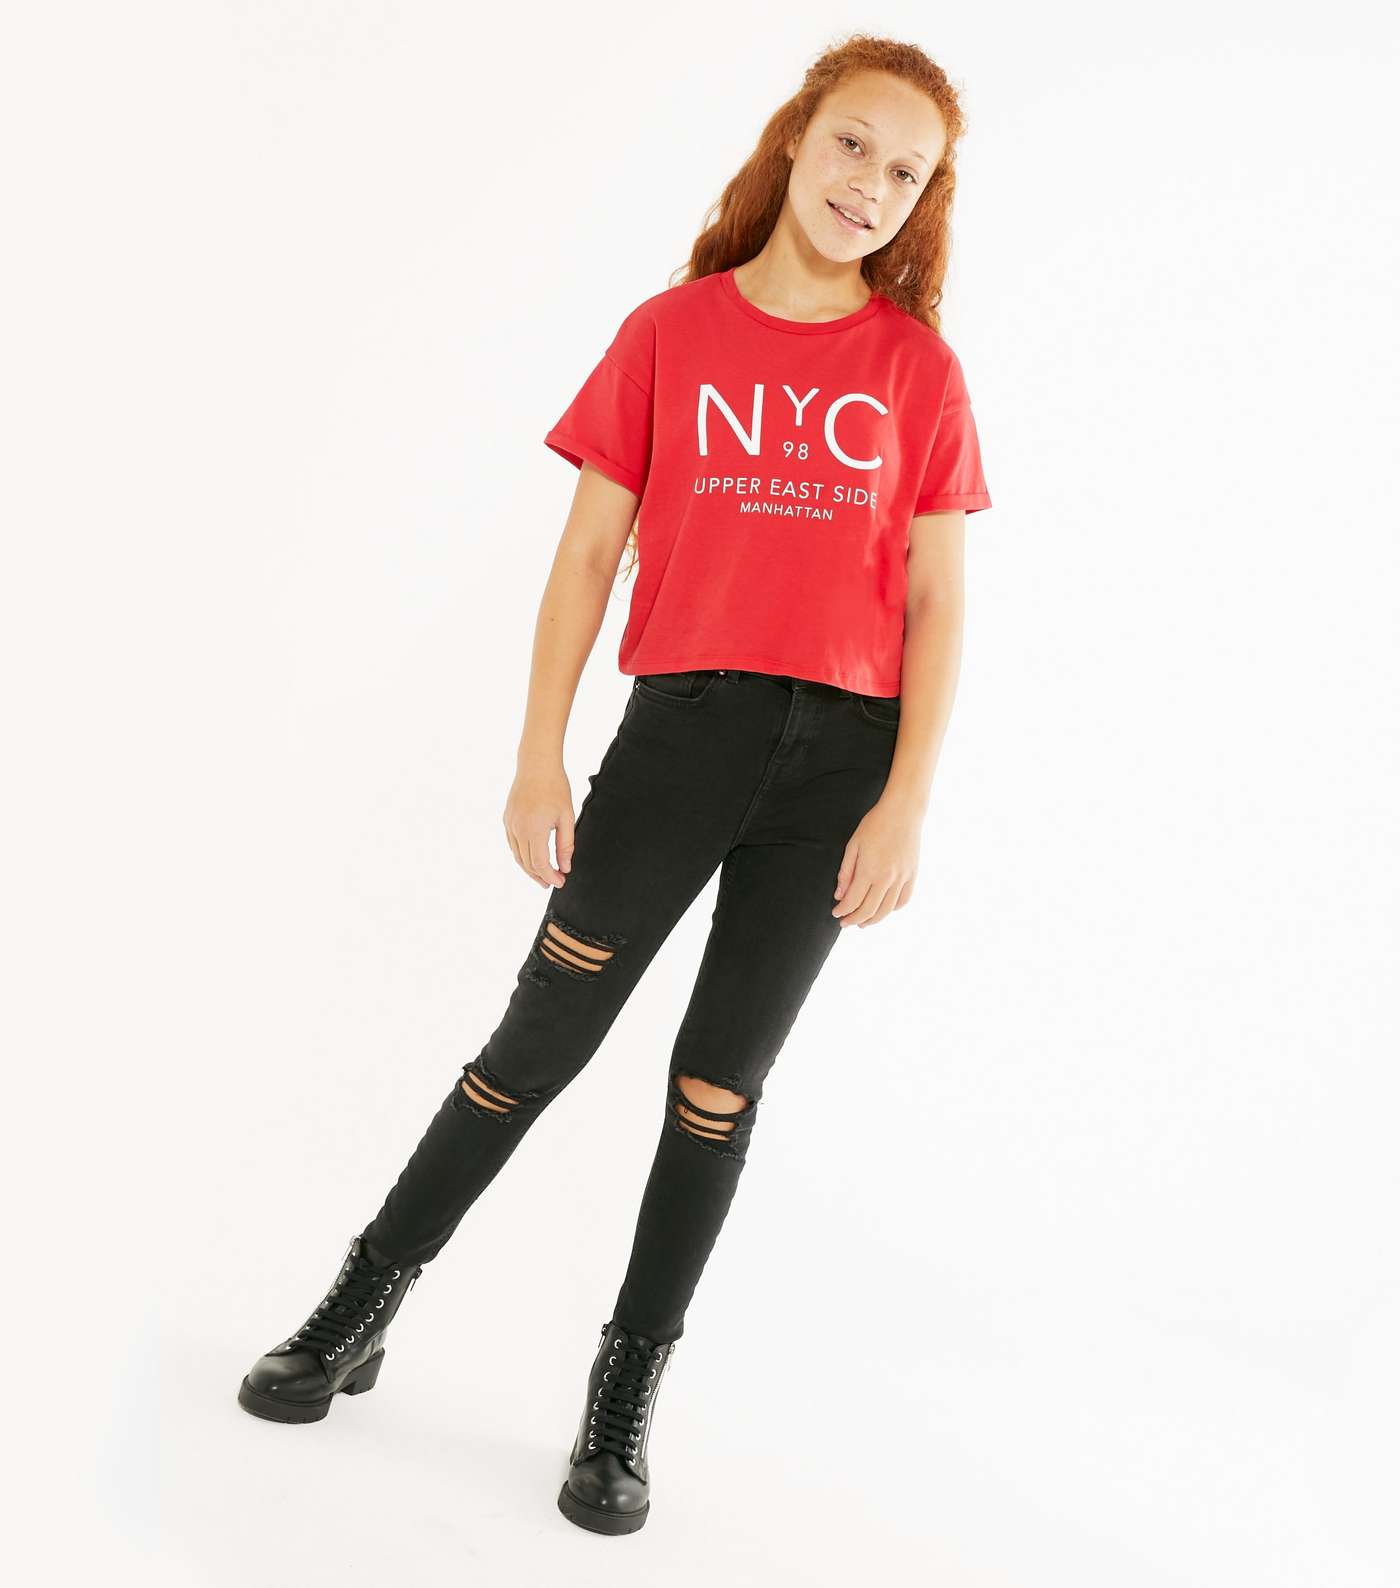 Girls Red NYC Upper East Side Logo T-Shirt Image 2